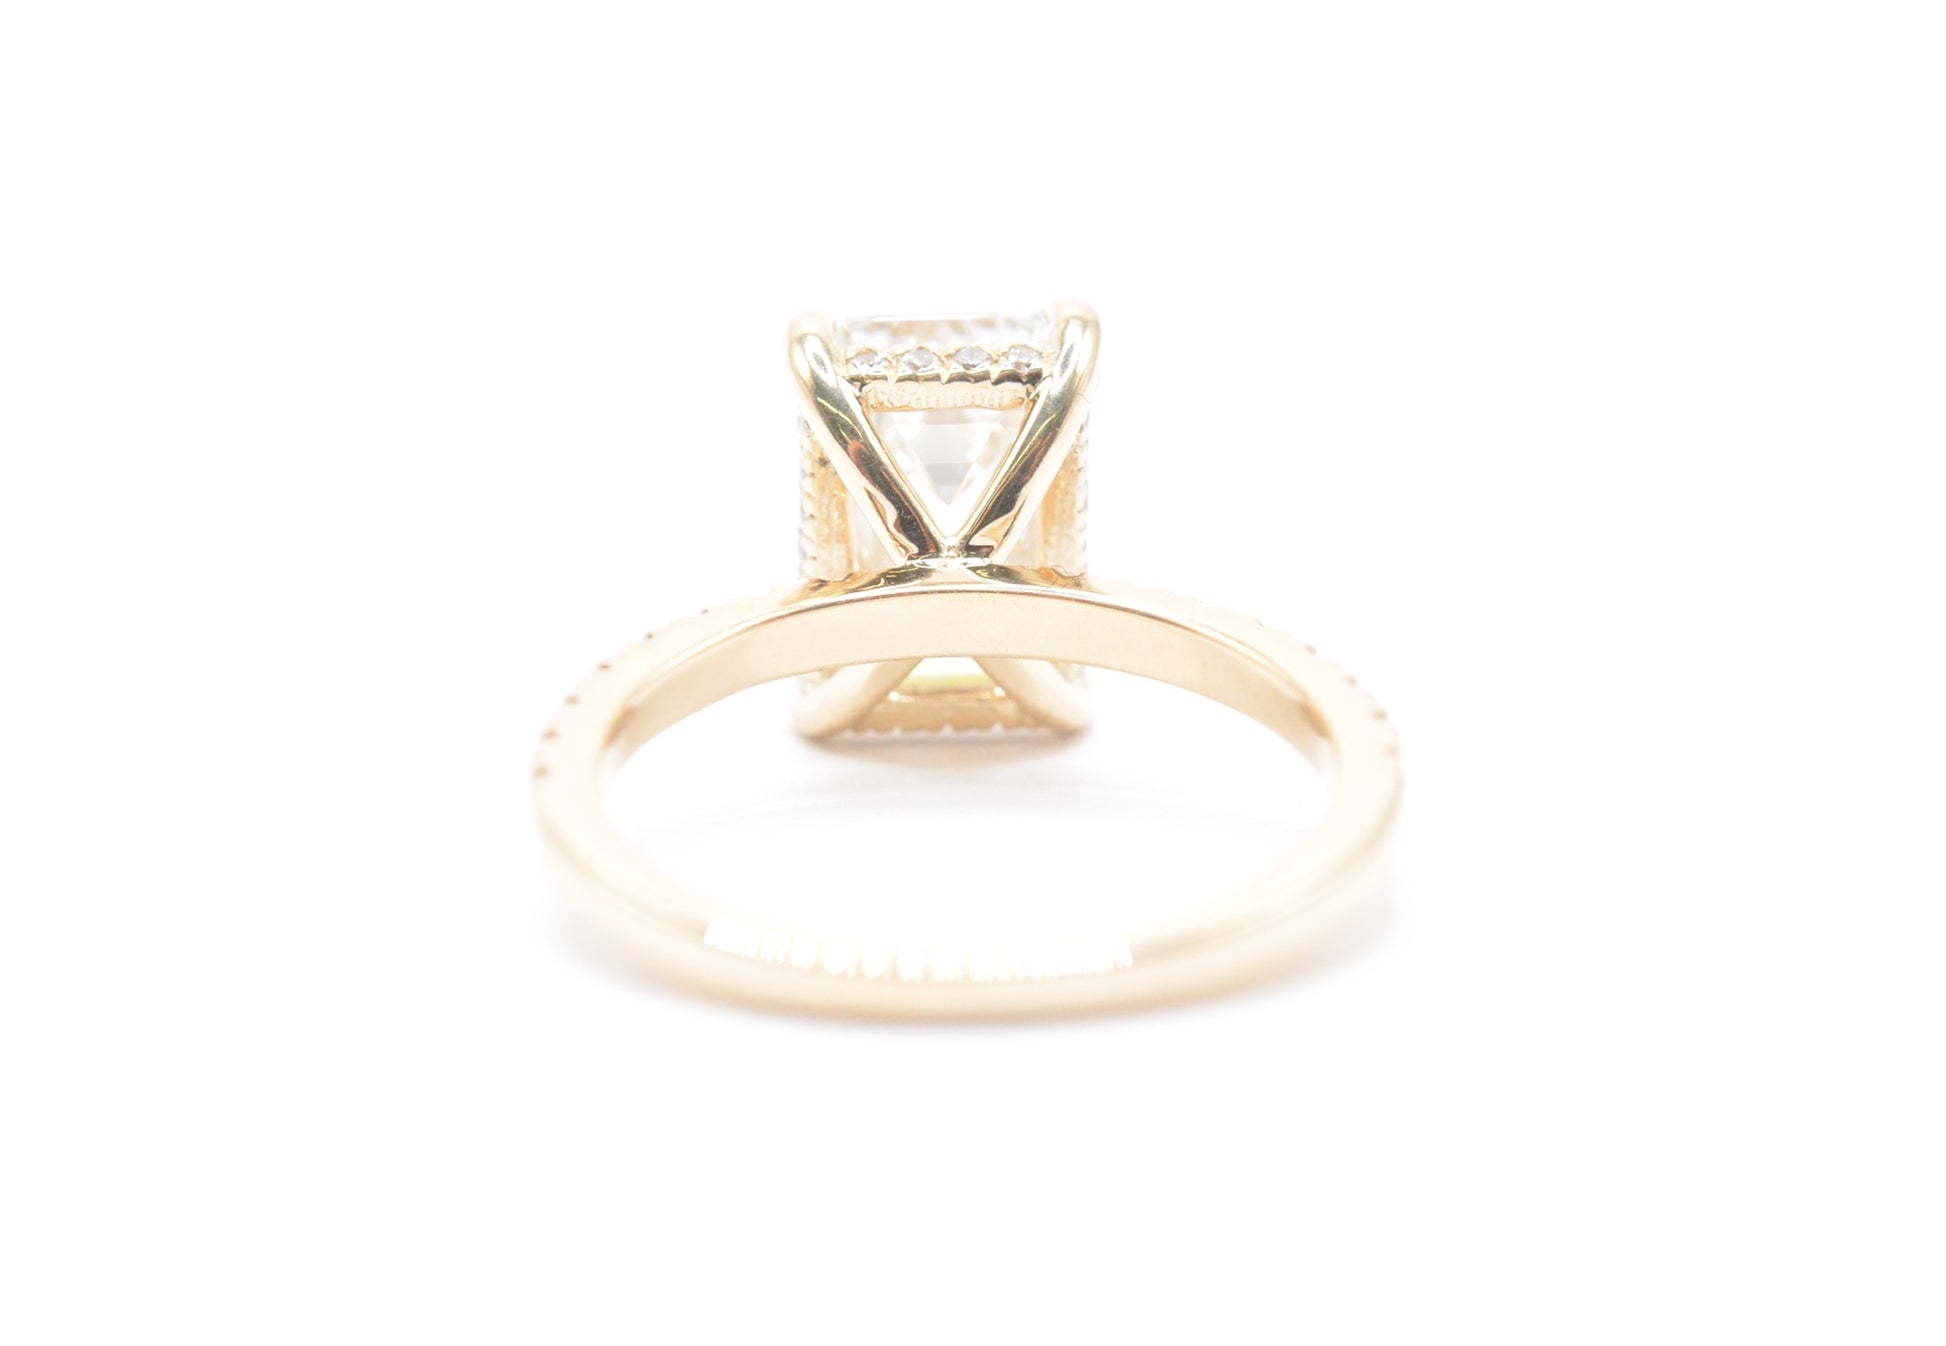 3ct Emerald Cut Lab-Grown Diamond Engagement Ring 14K Yellow Gold Made to Order